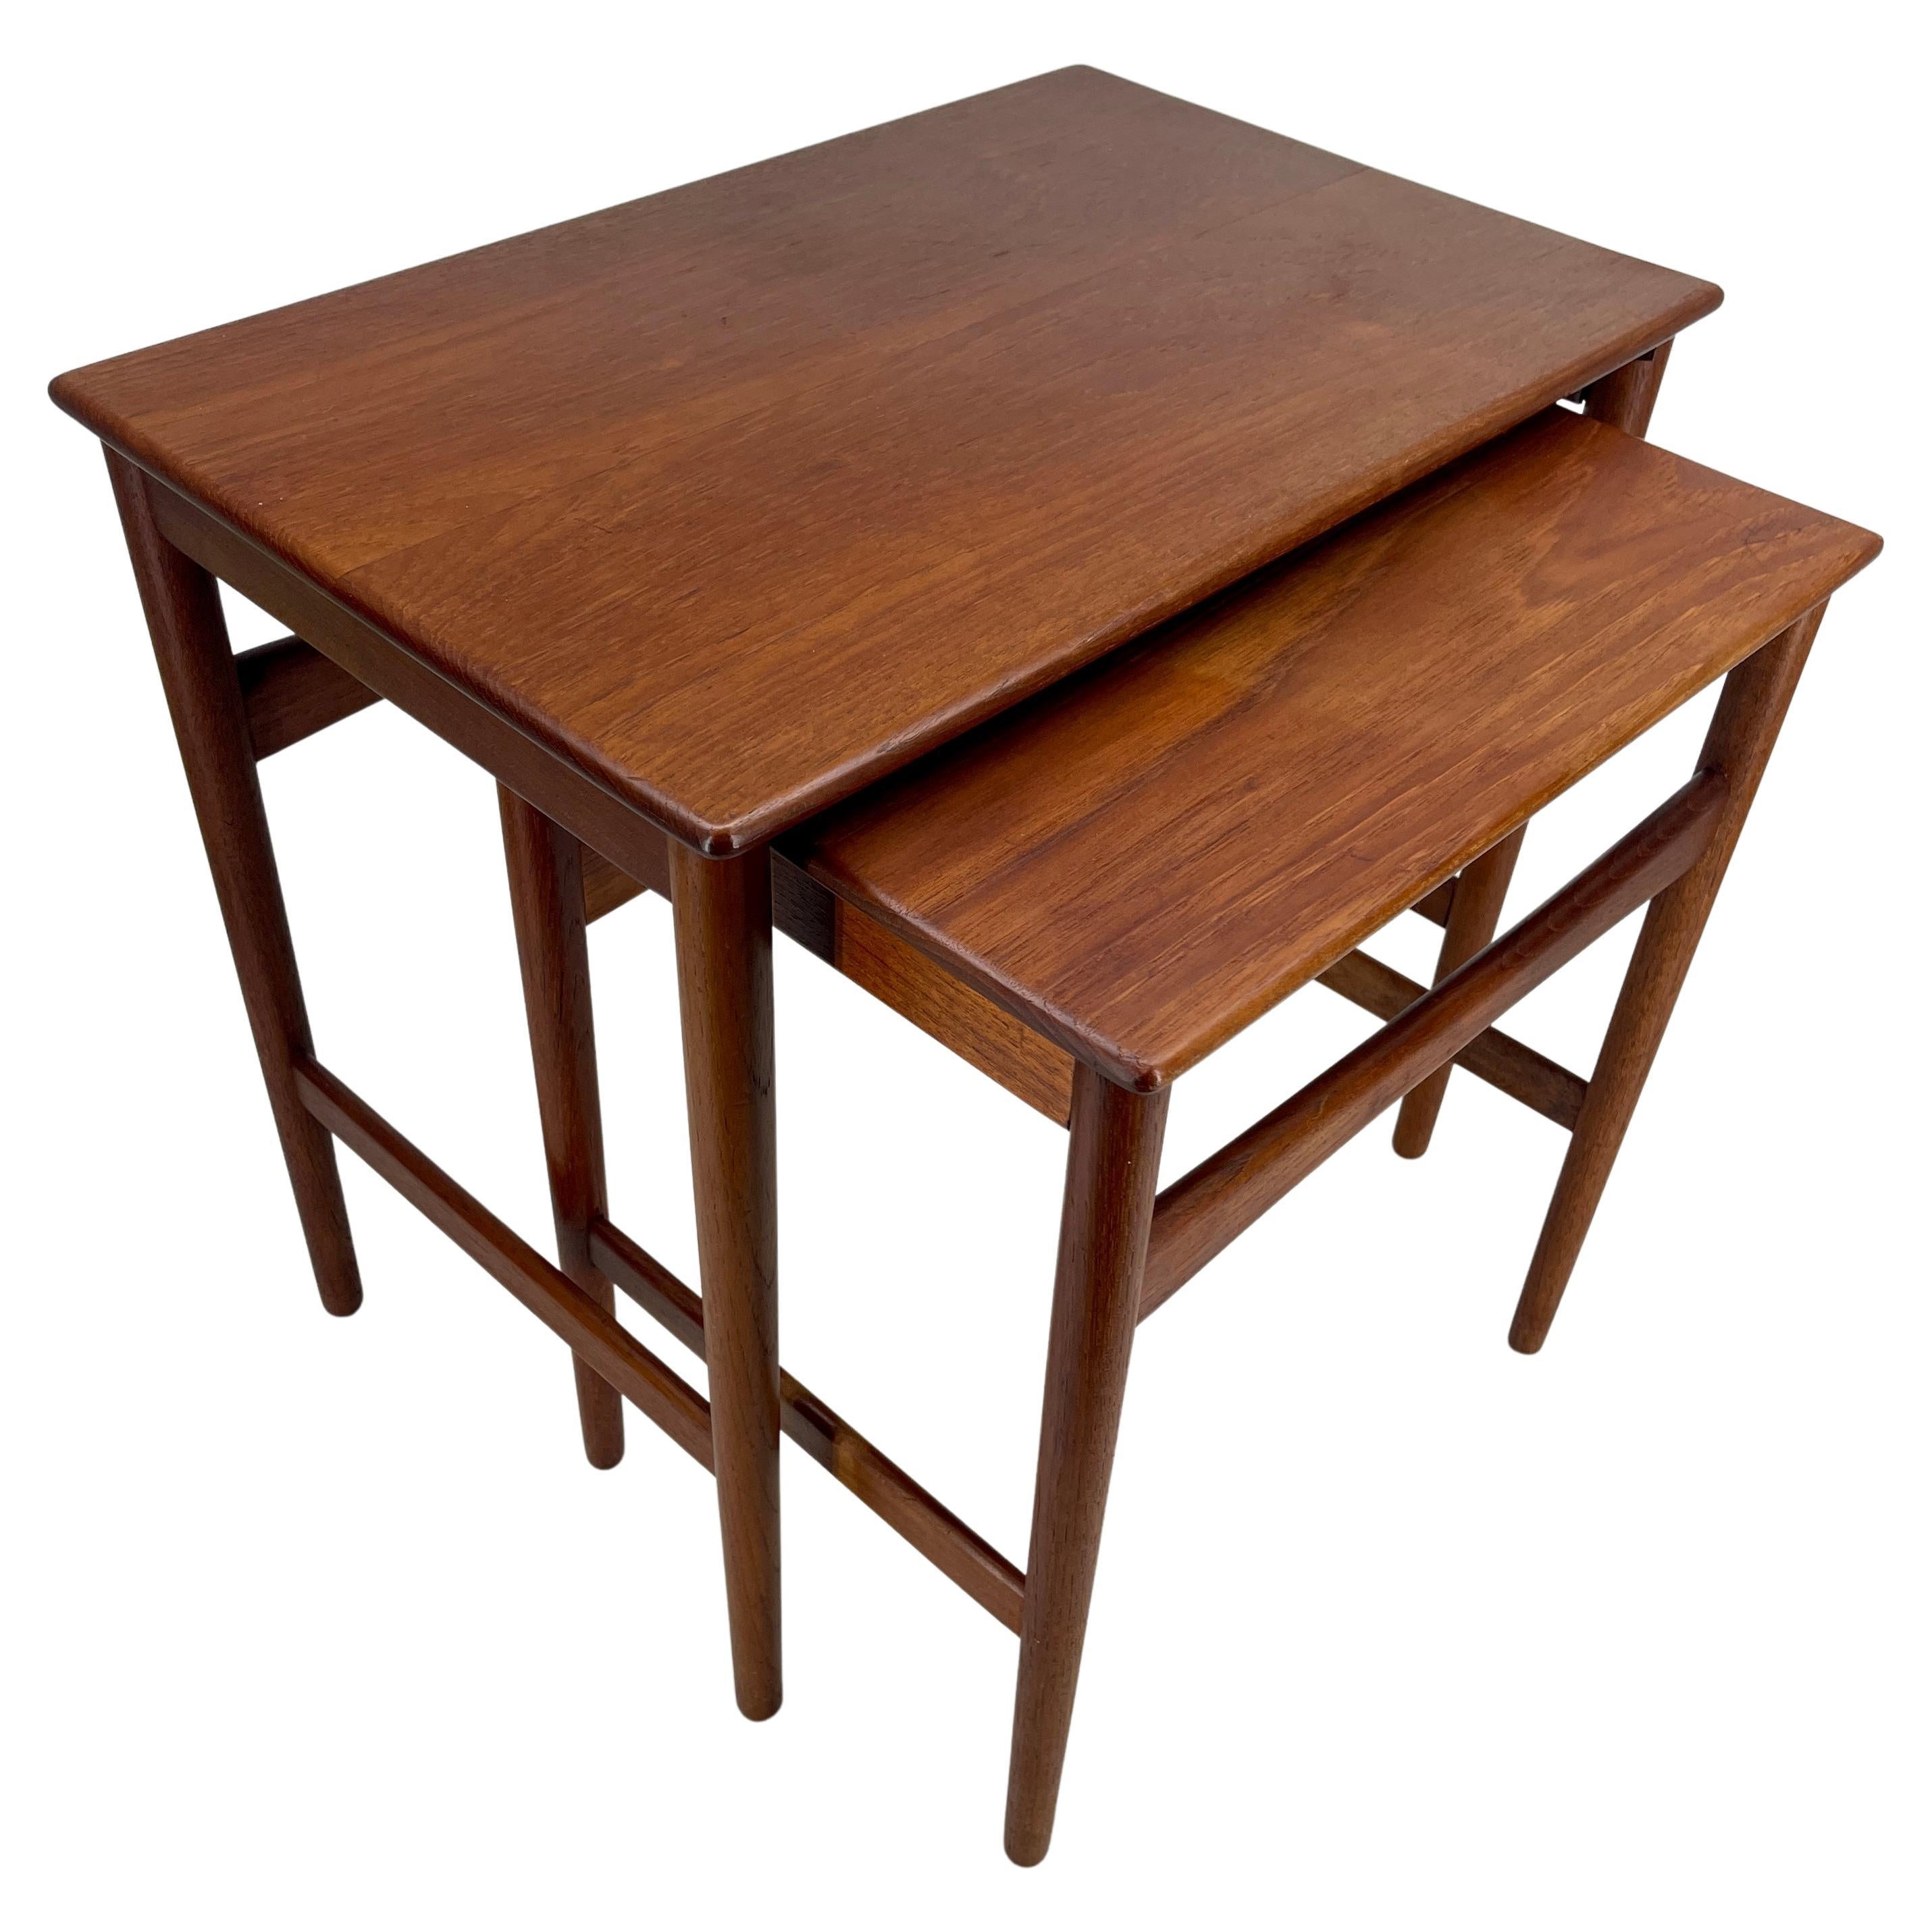 Danish Mid-Century Modern two-piece set of nesting tables by Hans J. Wegner and Andreas Tusk


